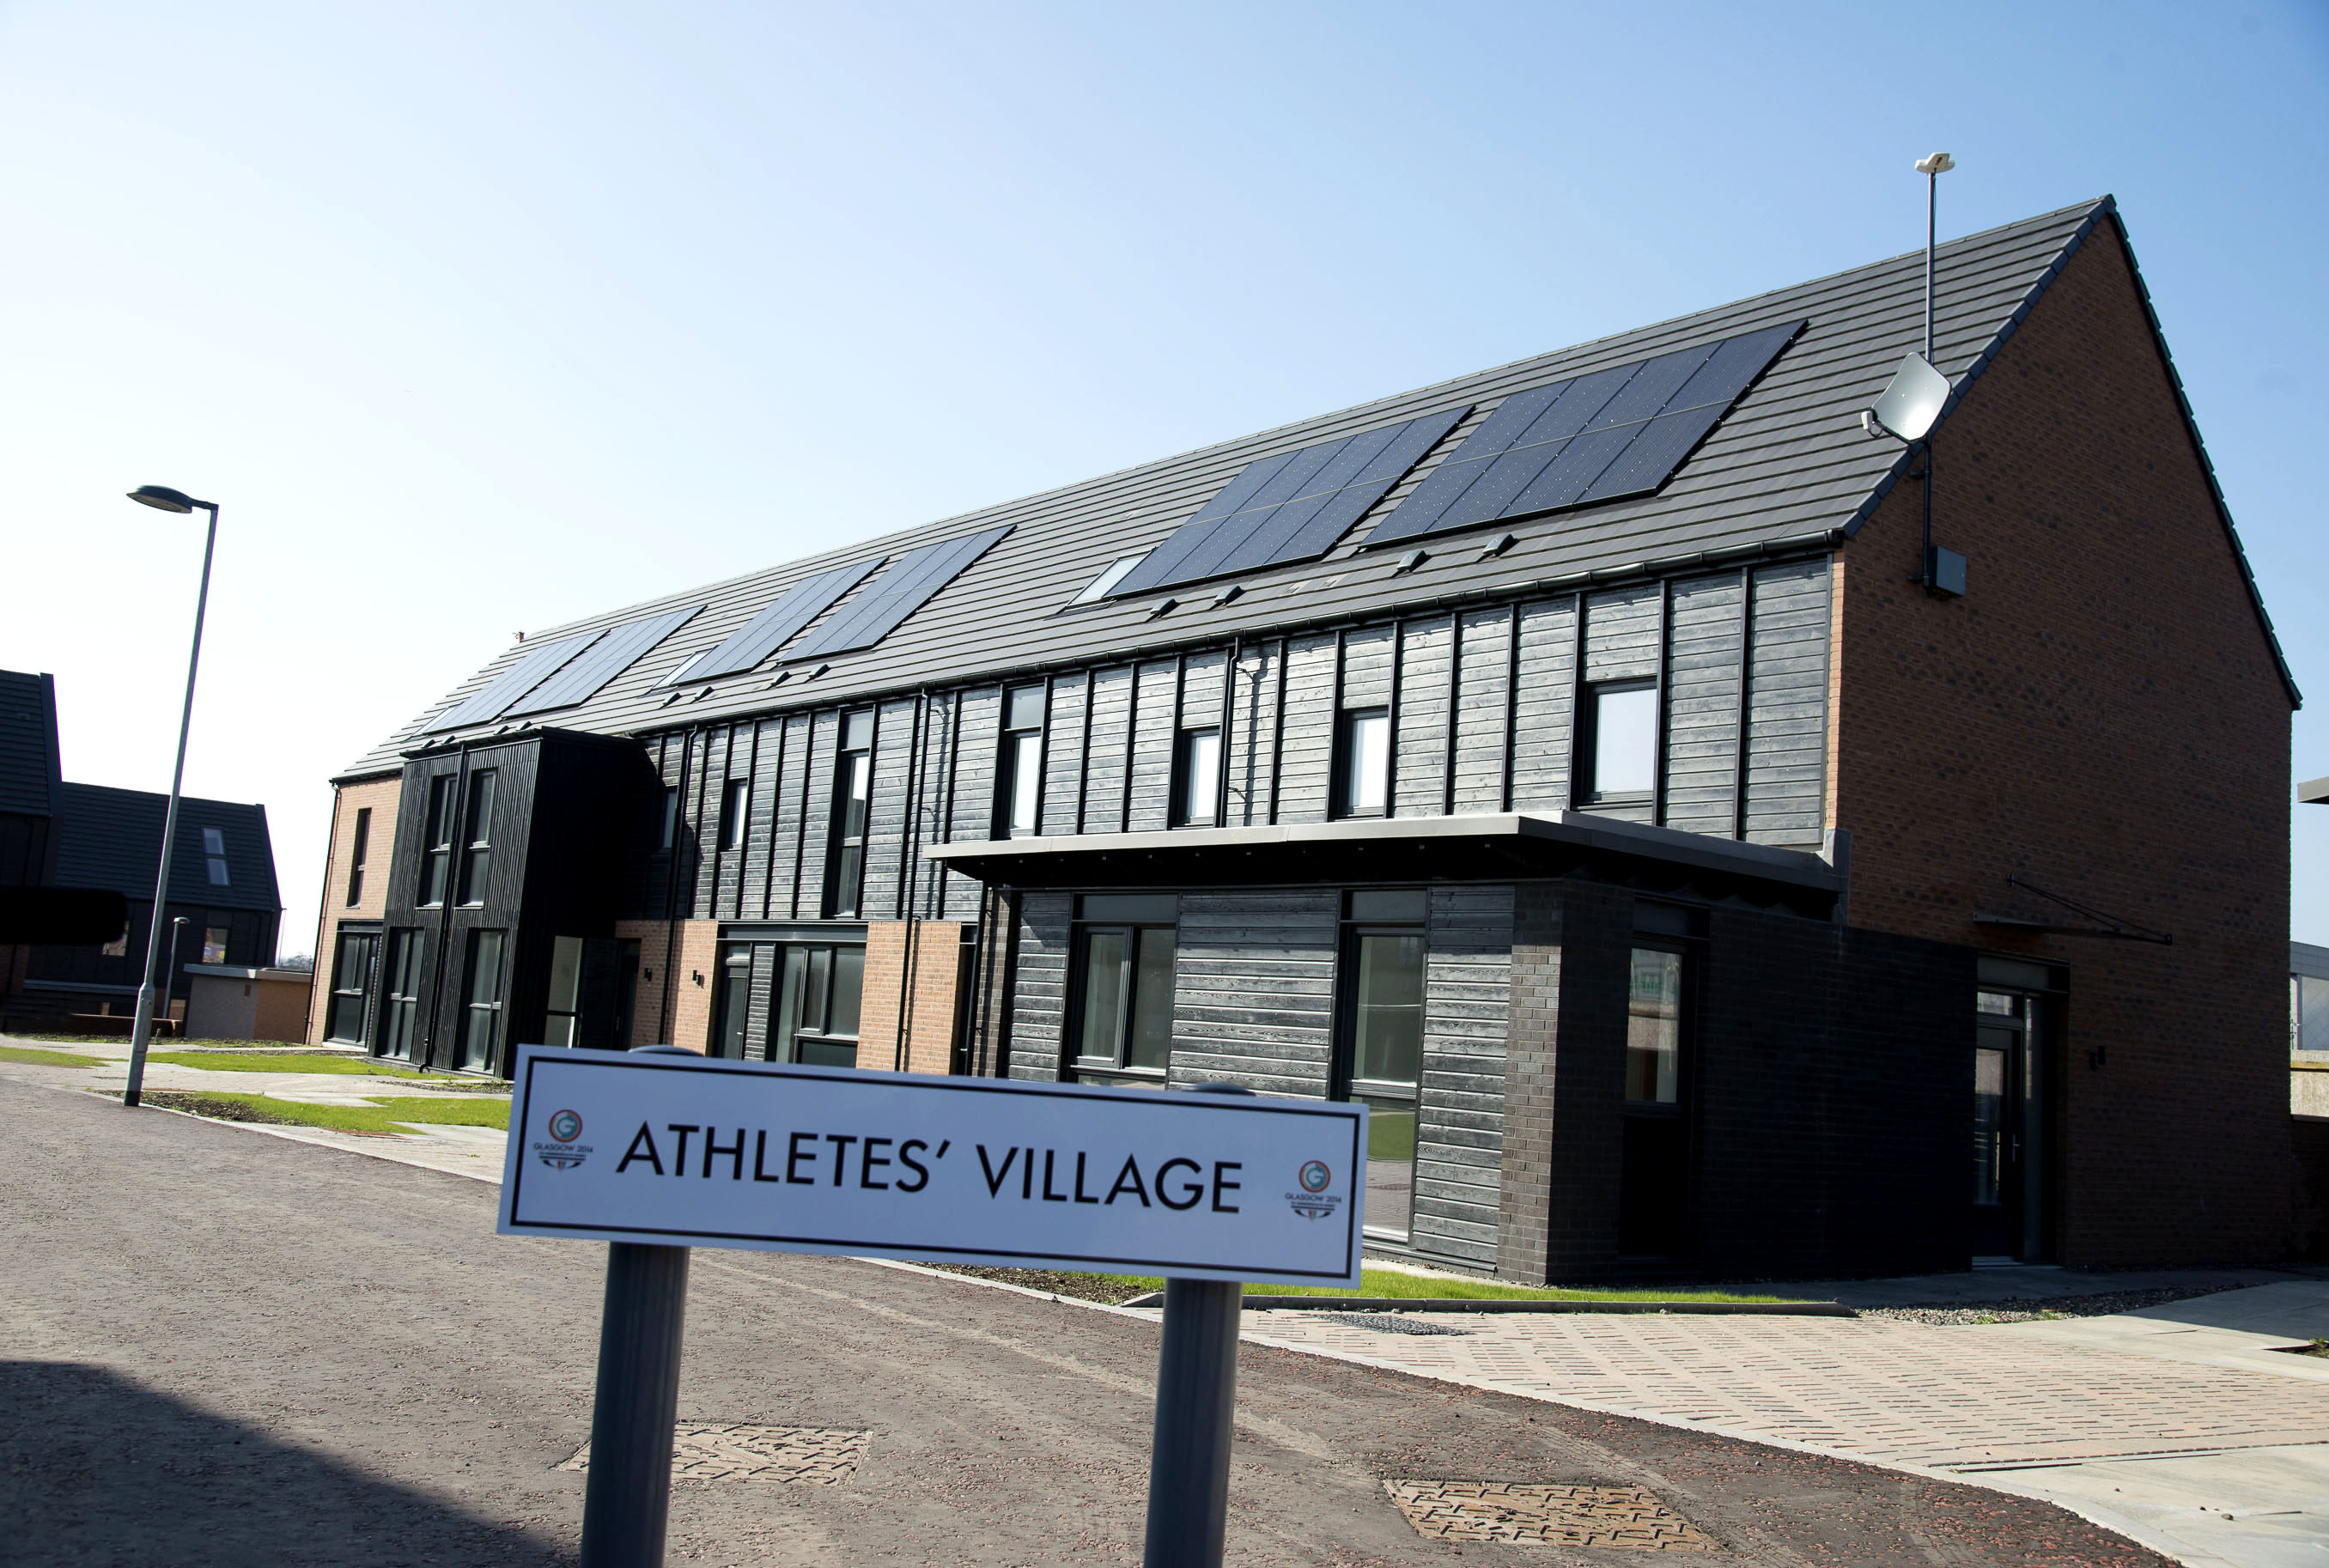 Residents were moved out to make way for the athletes' village.